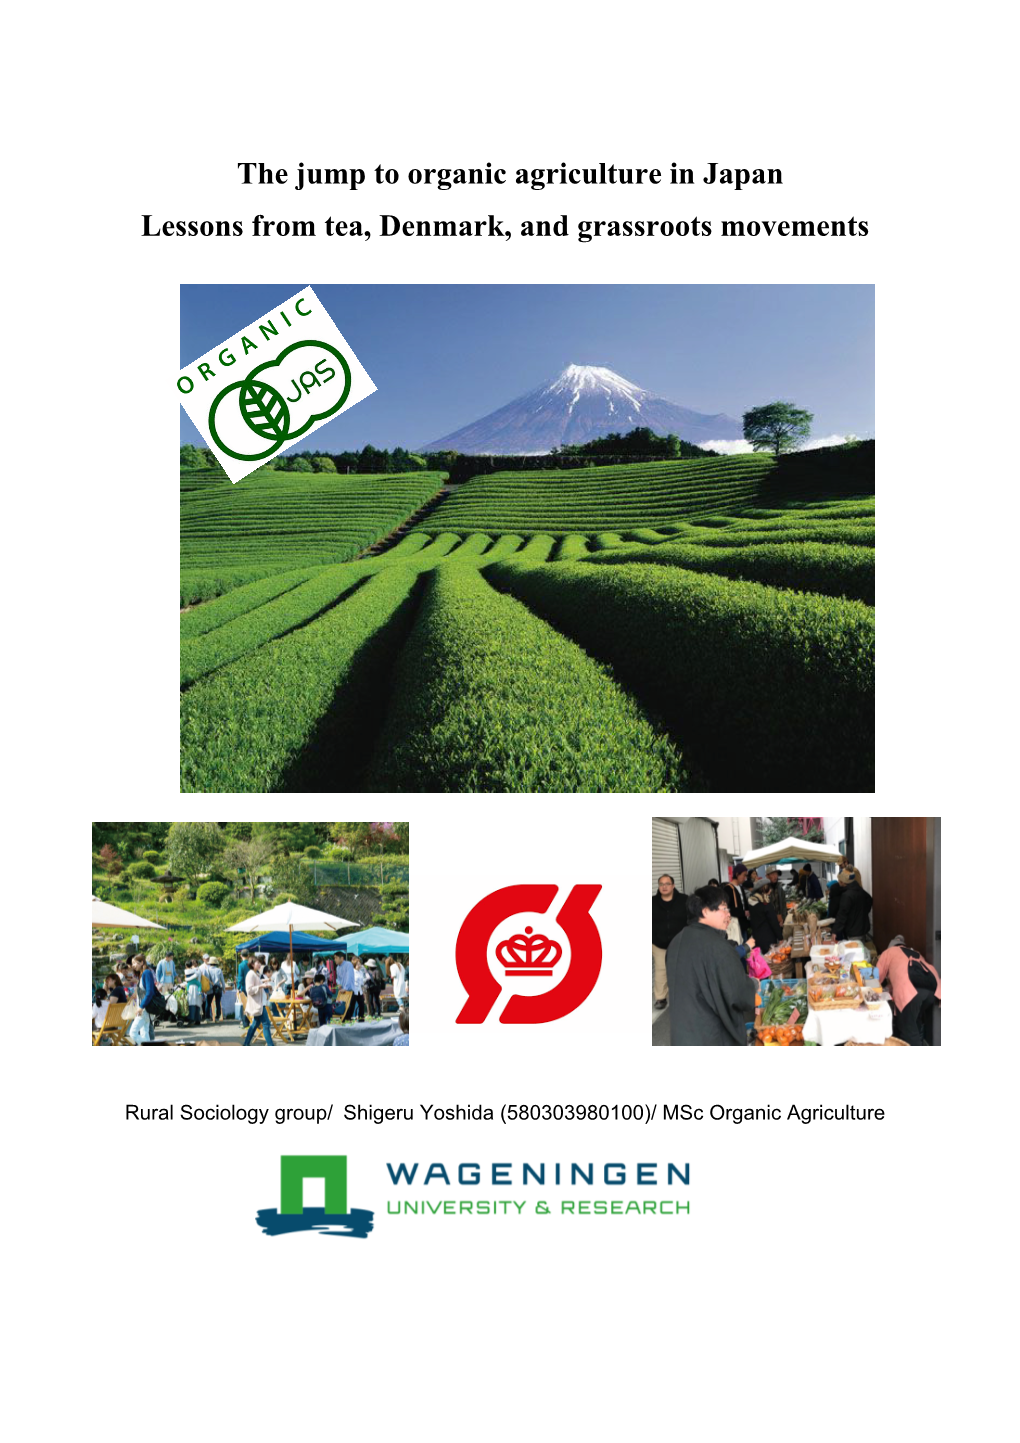 The Jump to Organic Agriculture in Japan Lessons from Tea, Denmark, and Grassroots Movements